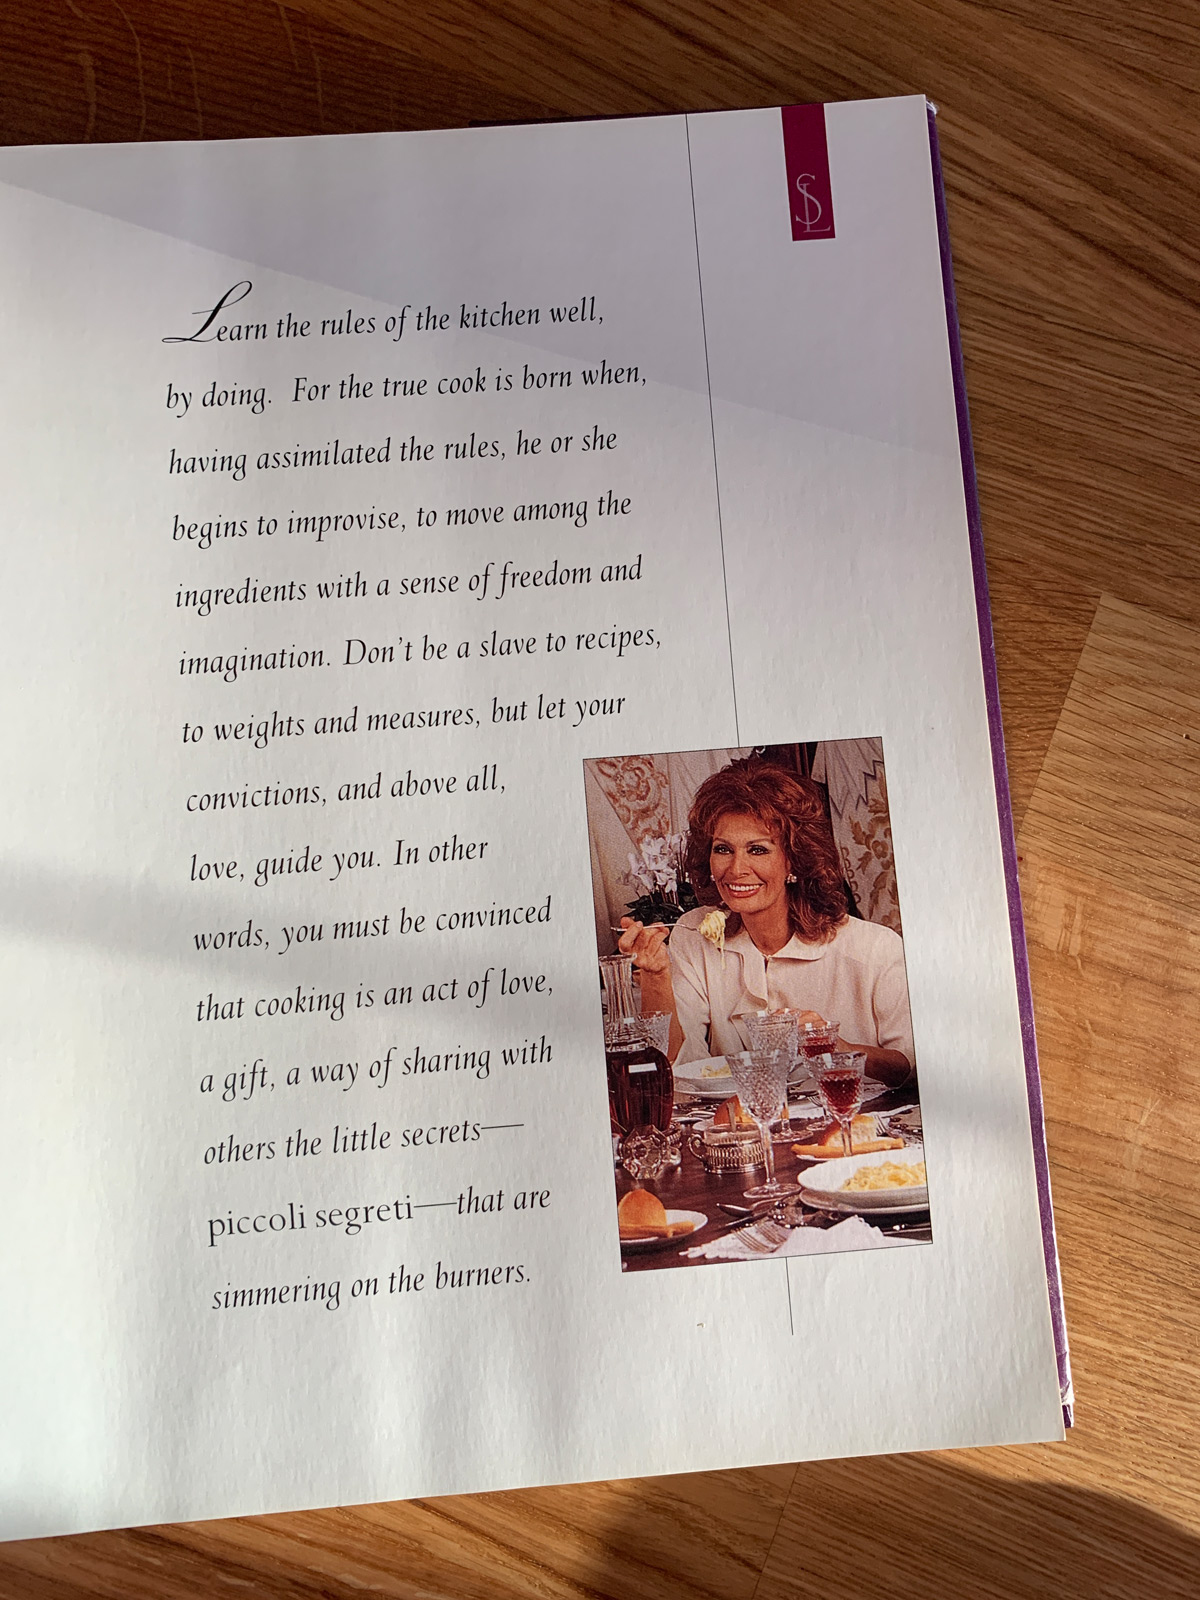 Little cooking secrets. Sophia Loren: “Cooking is an Act of Love”. Maria Kalenska blog about Odessa